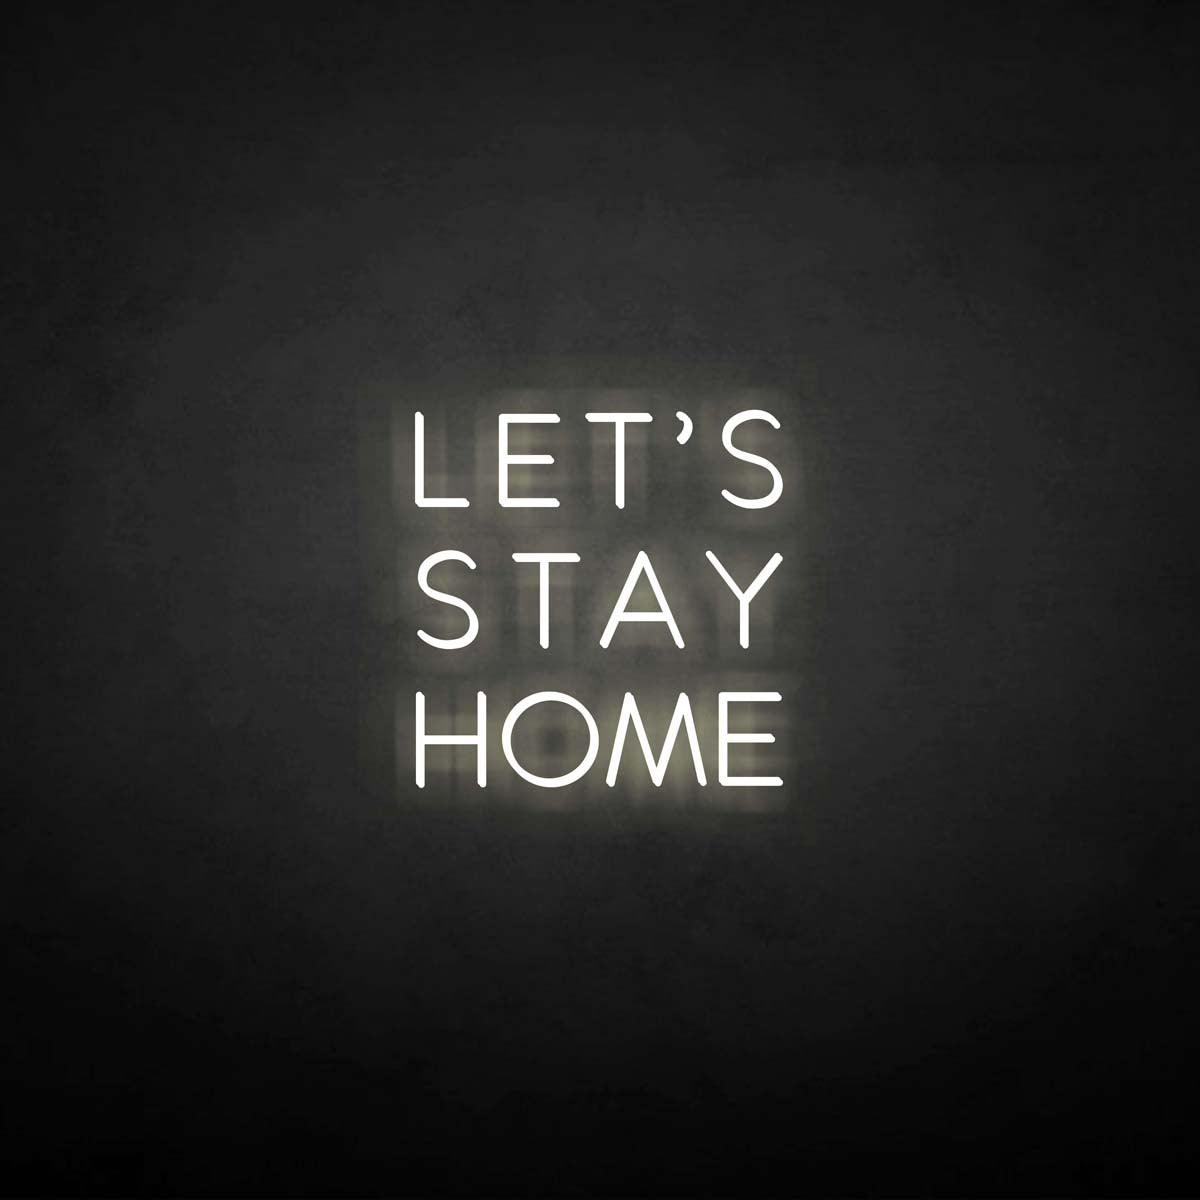 'LET'S STAY HOME' neon sign